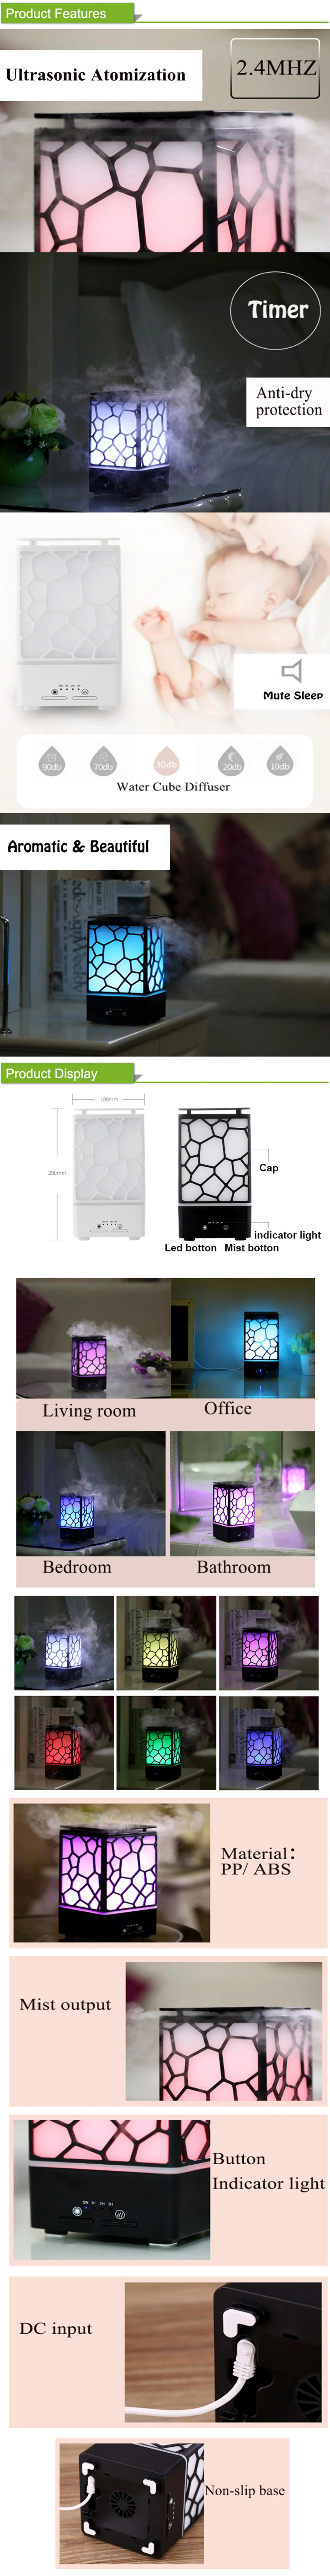 2018 New Air 200 ML Water Cube  Oil Aroma Diffuser with 7 Colors Changing LED Light